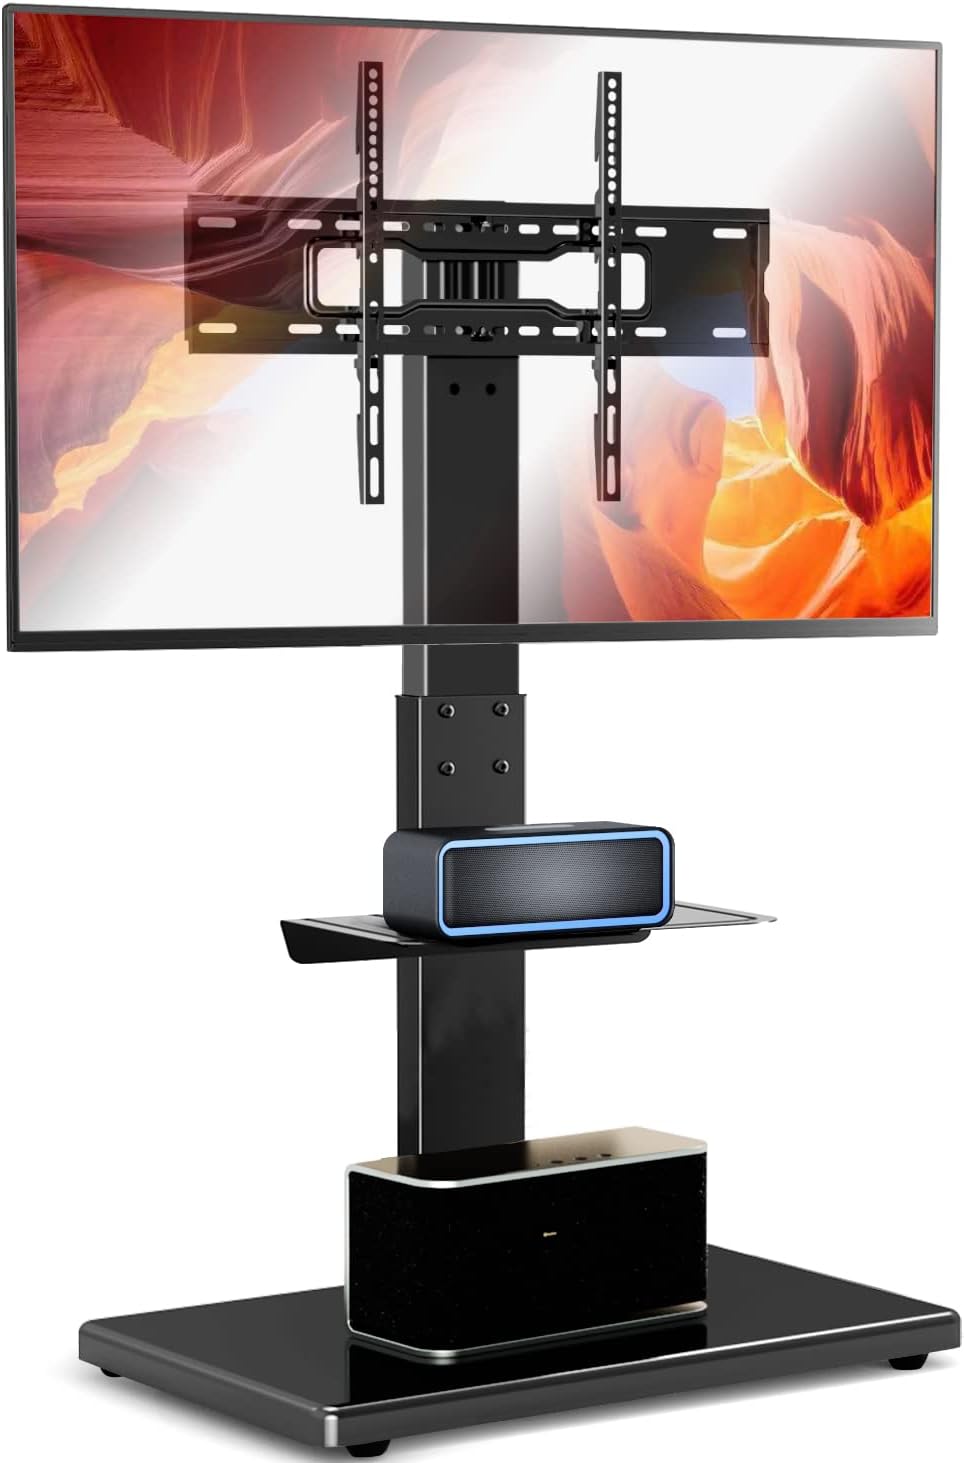 YOMT Floor TV Stand with Mount Wood Base Tall Corner TV Stand for Most 32-75 Inch TVs up to 110 lbs, Swivel TV Mount Stand with Adjustable Shelf for Bedroom and Living Room, Black